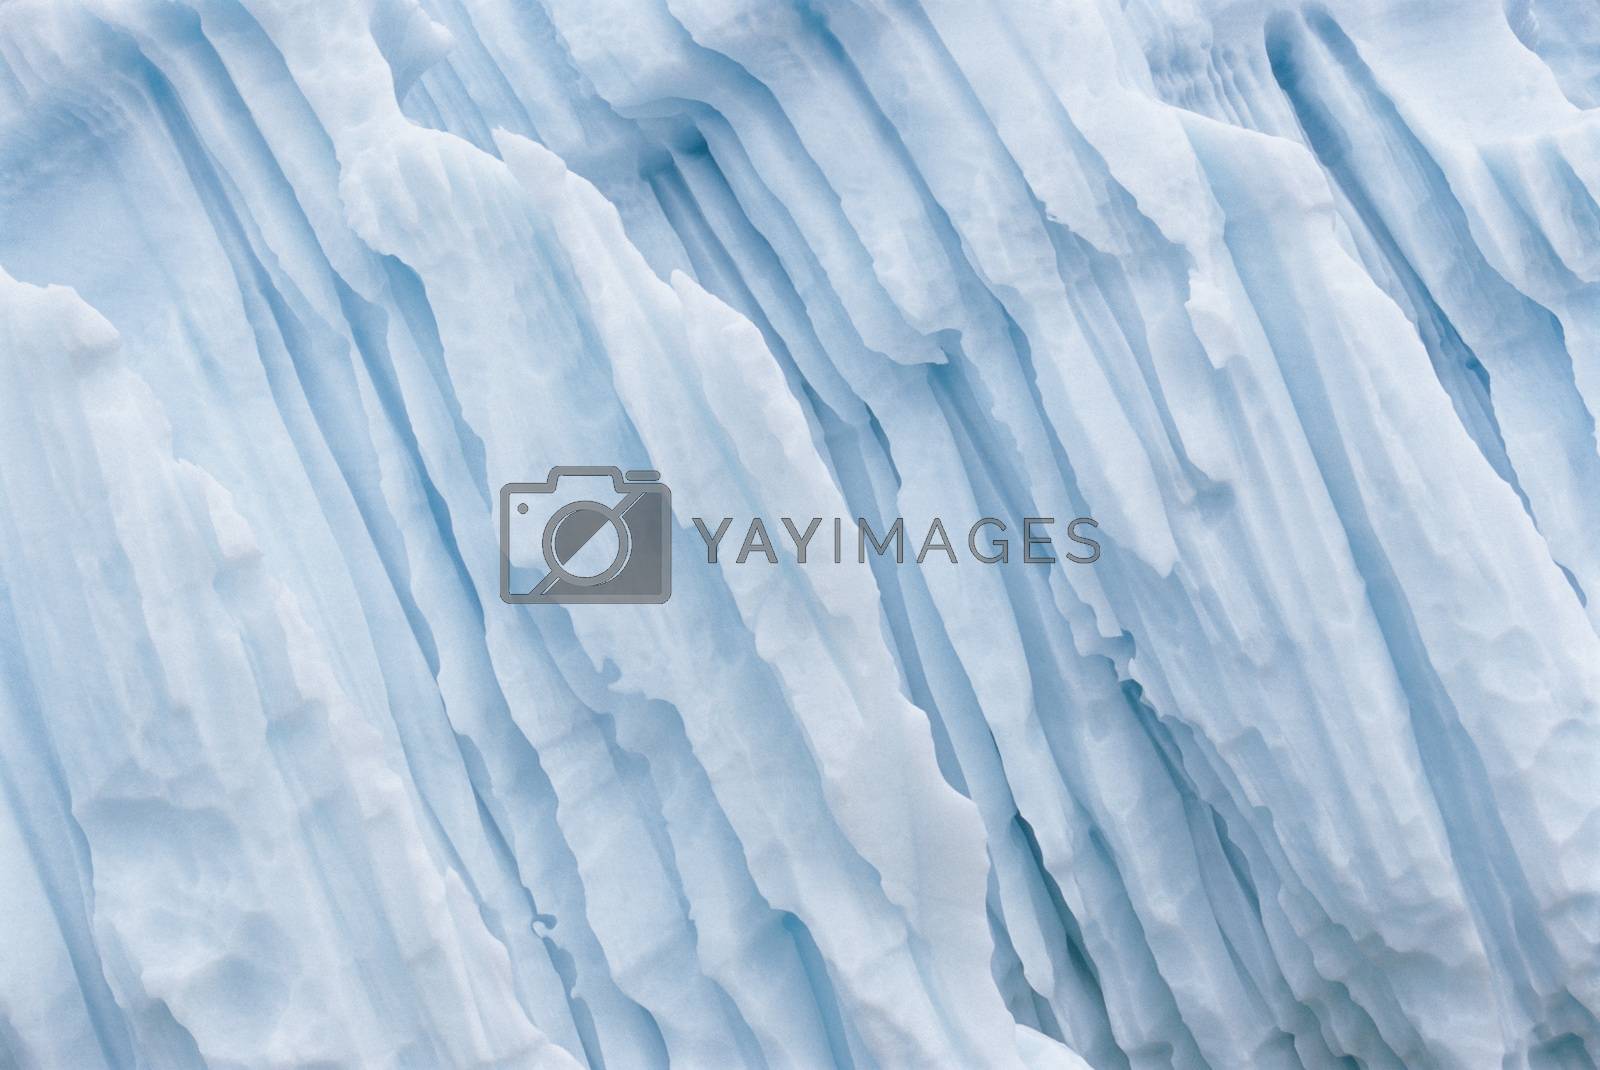 Royalty free image of Closeup of ice formation by moodboard